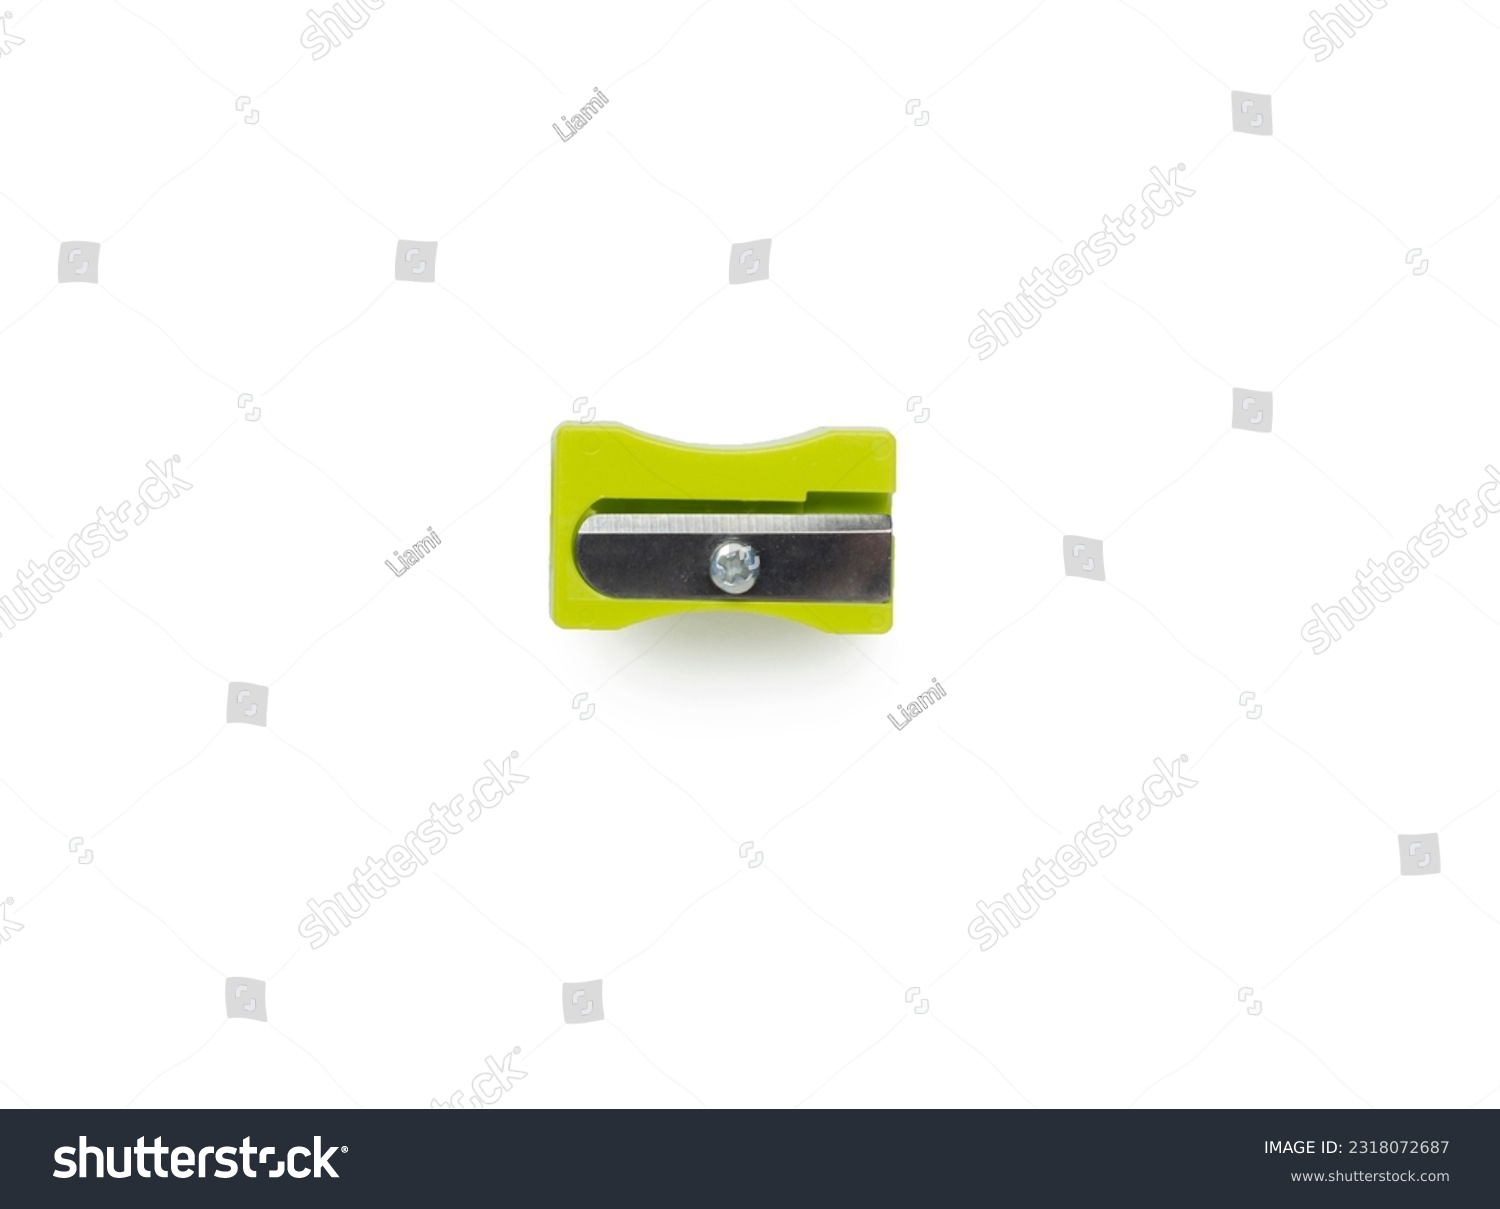 Pencil Sharpener Isolated on White Background. #2318072687